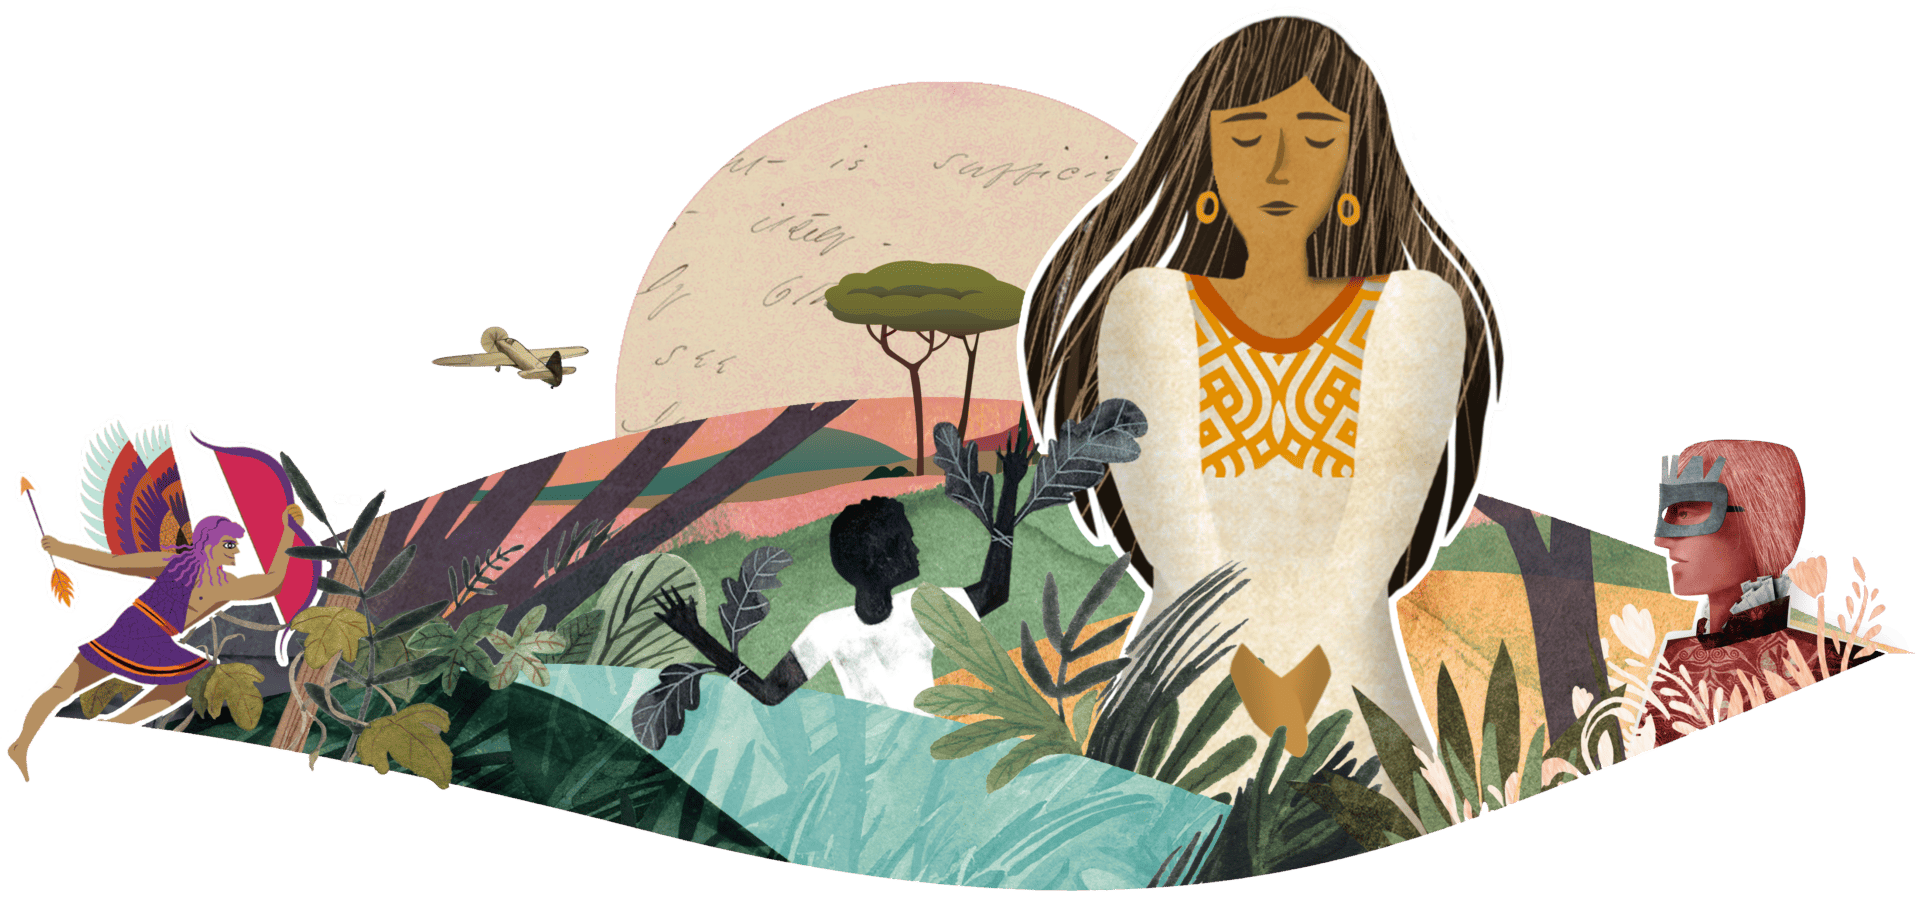 Illustration of diverse cultural representations with ancient and modern figures, including a native american woman and african masks, set against a backdrop of nature and historical script.